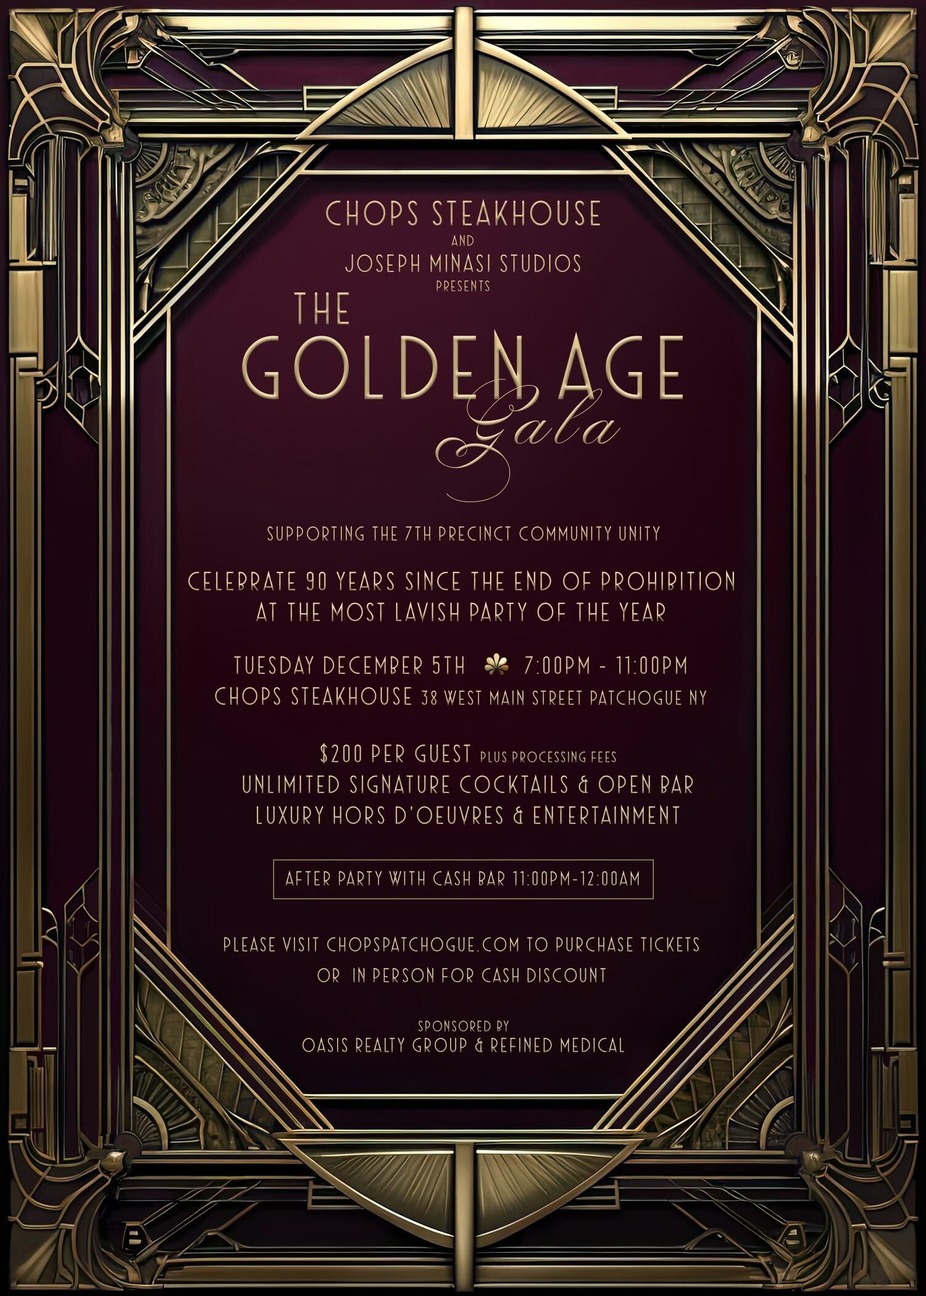 The Golden Age Gala event photo